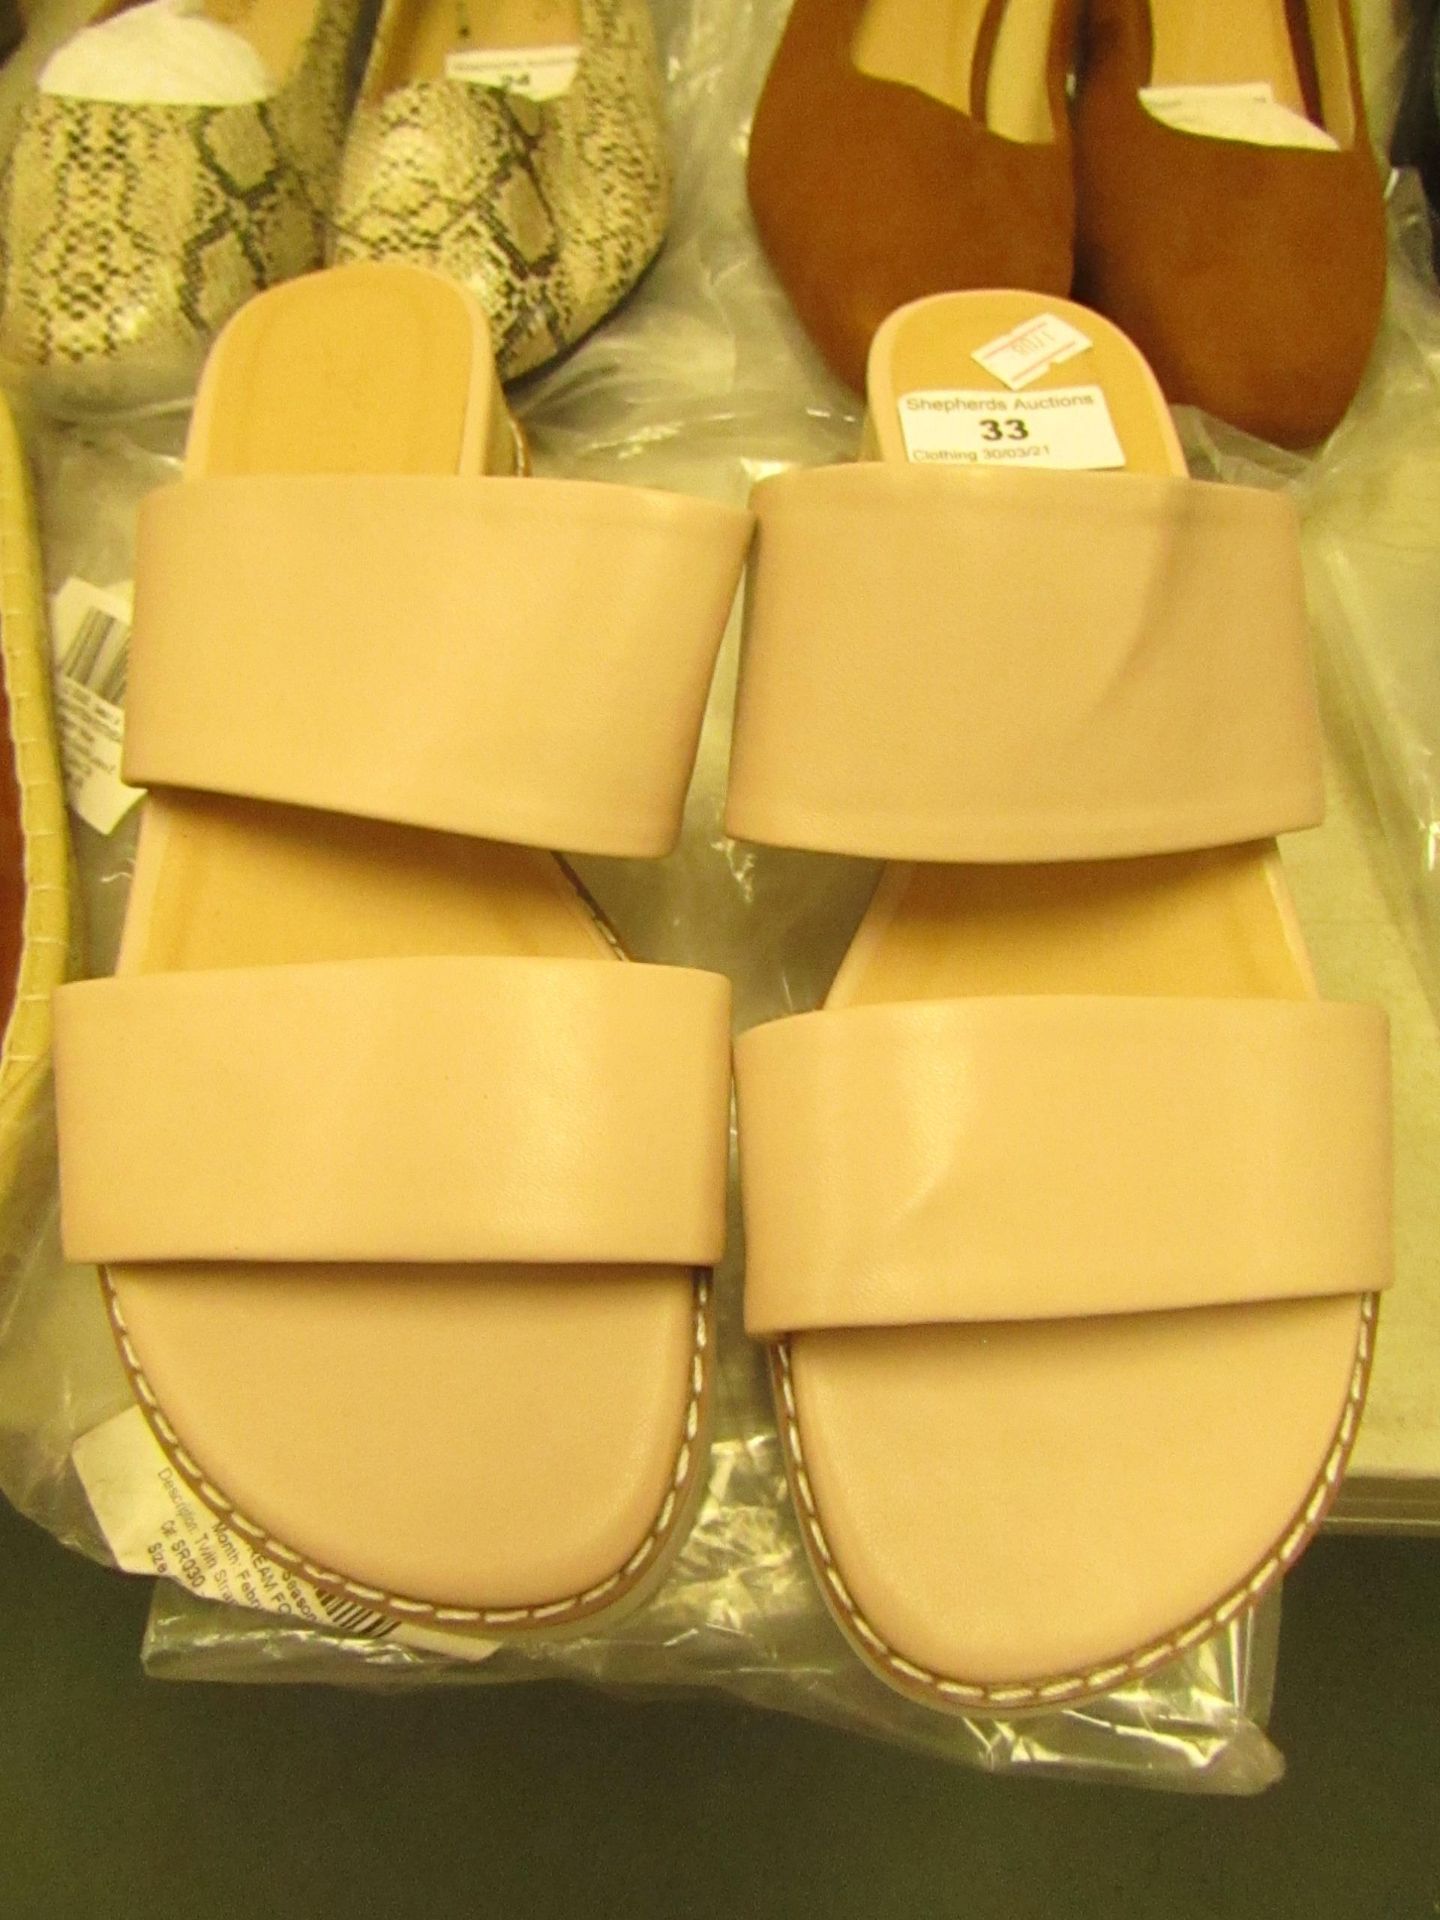 1 x JD Williams Twin Strap Nude Wedge Sandals size 4 new see image for style